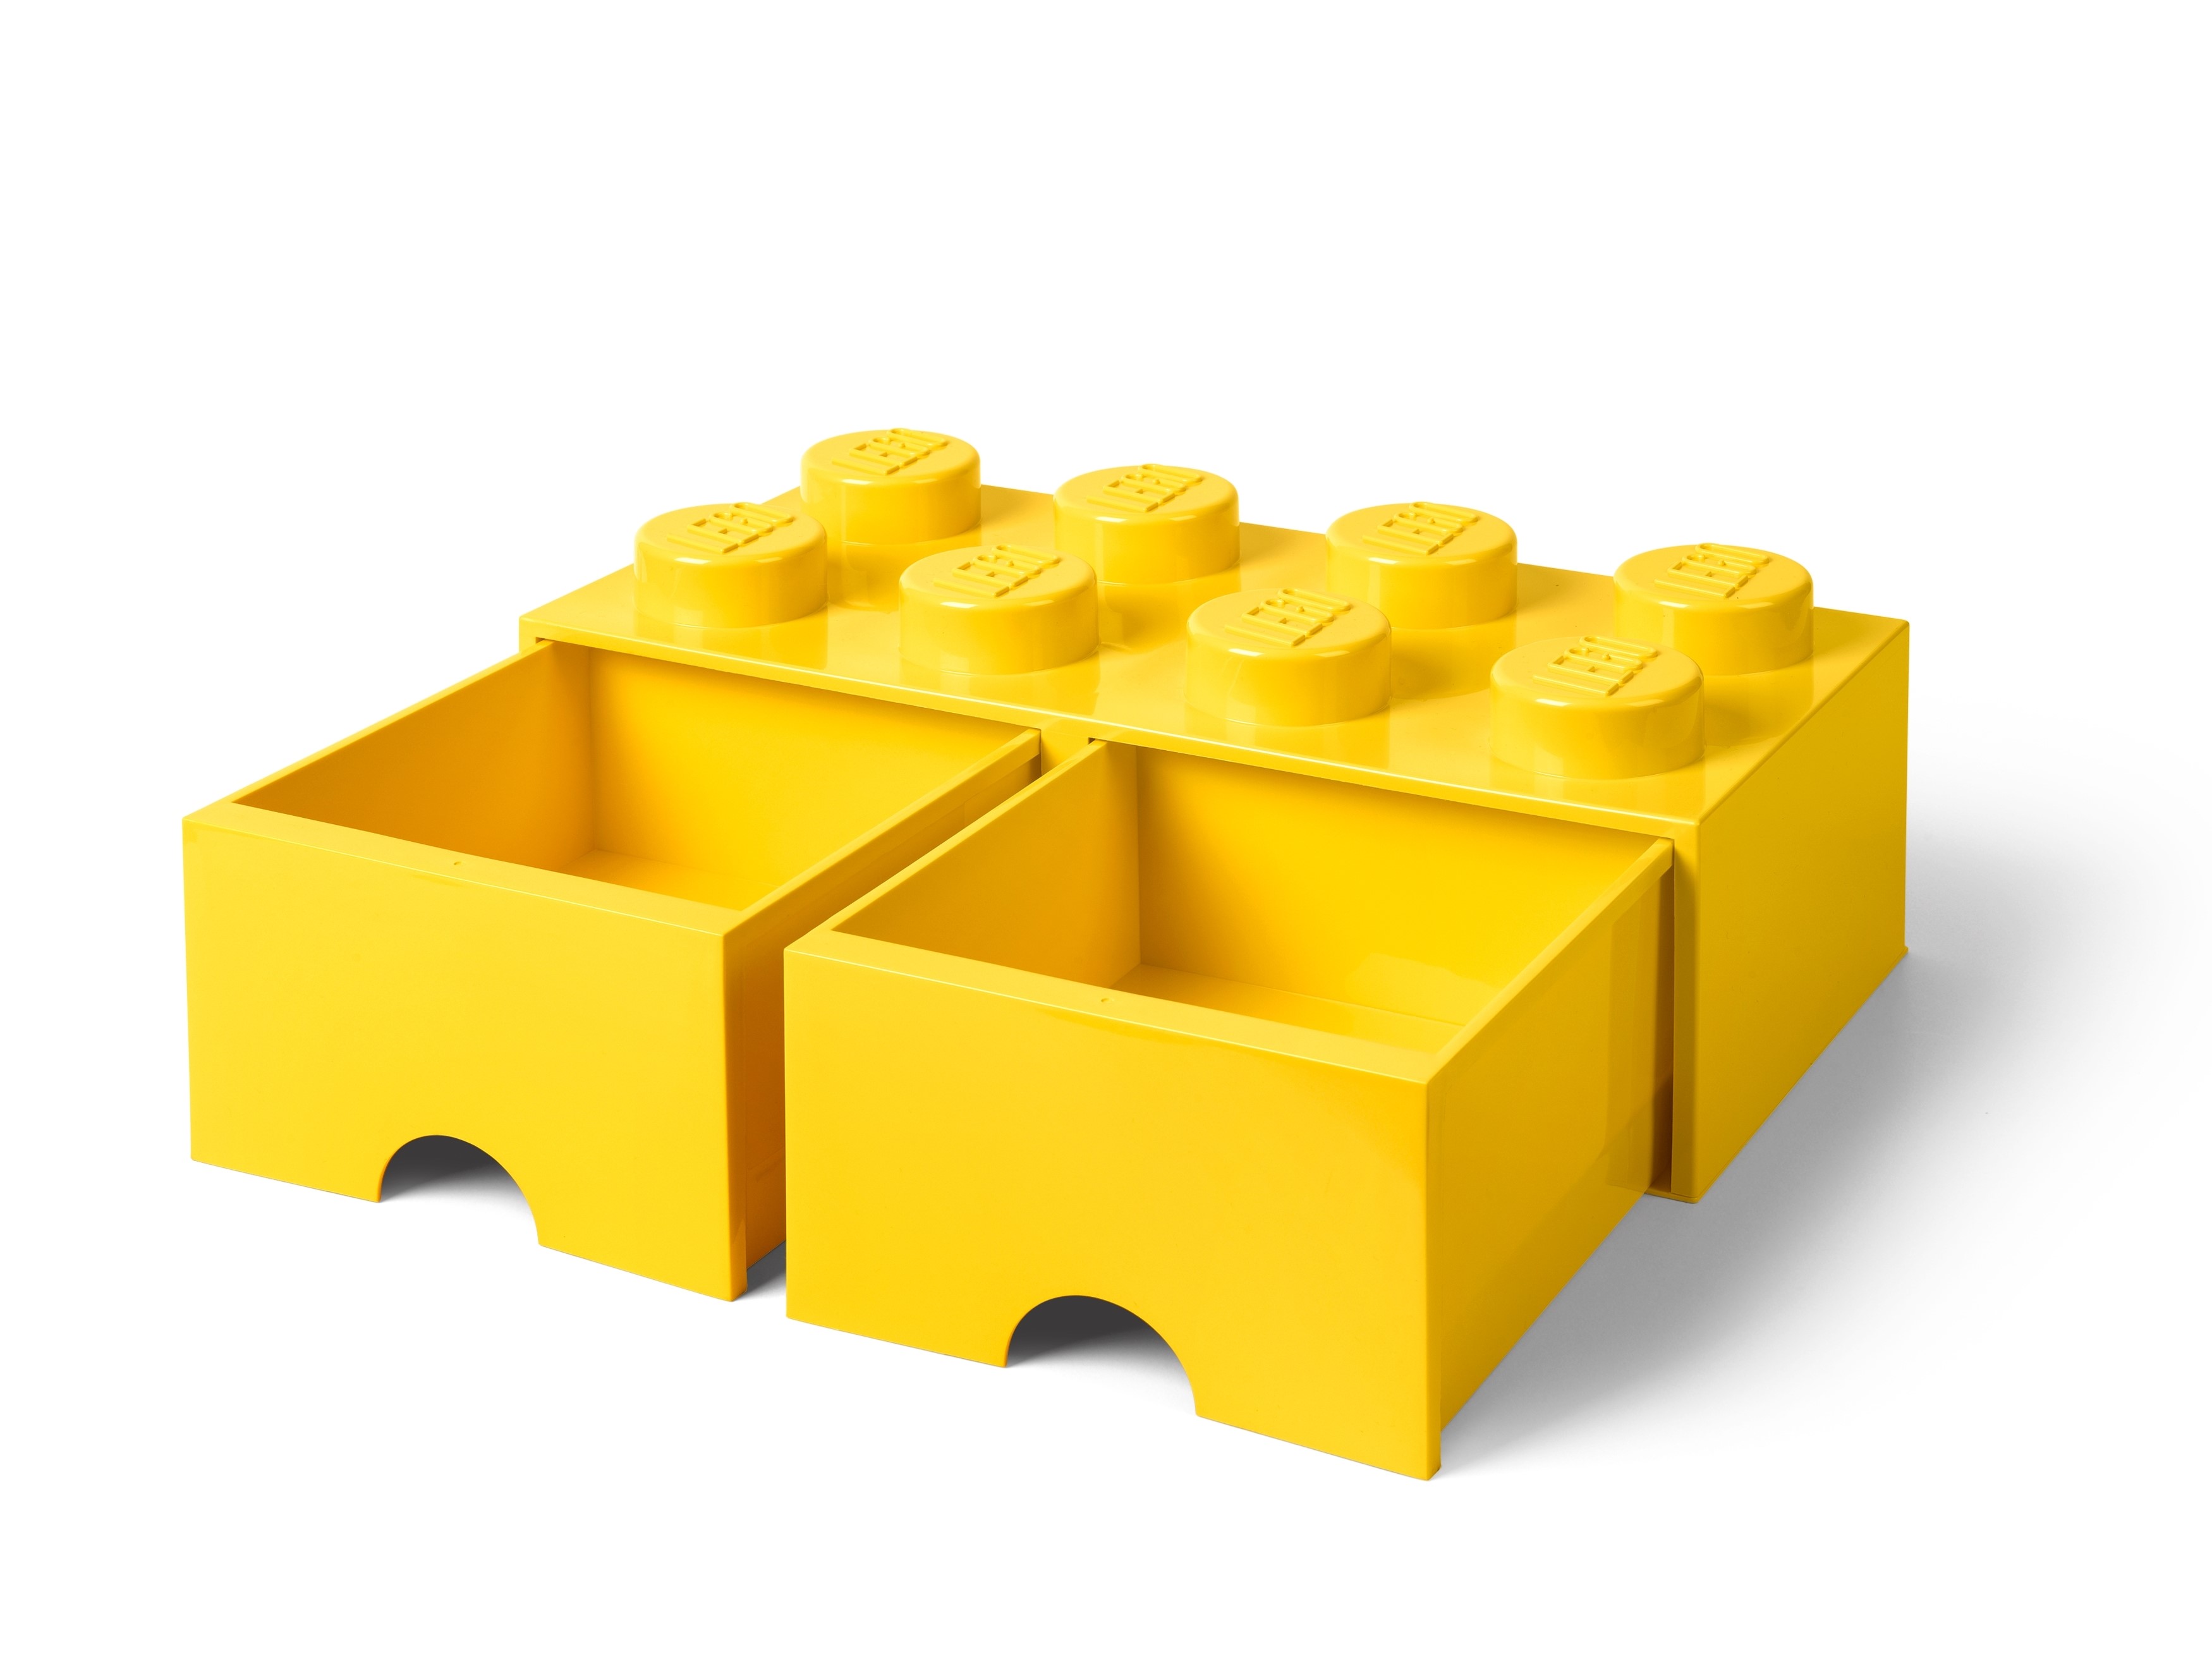 8-Stud Storage Brick – Blue 5006921 | Other | Buy online at the Official  LEGO® Shop US